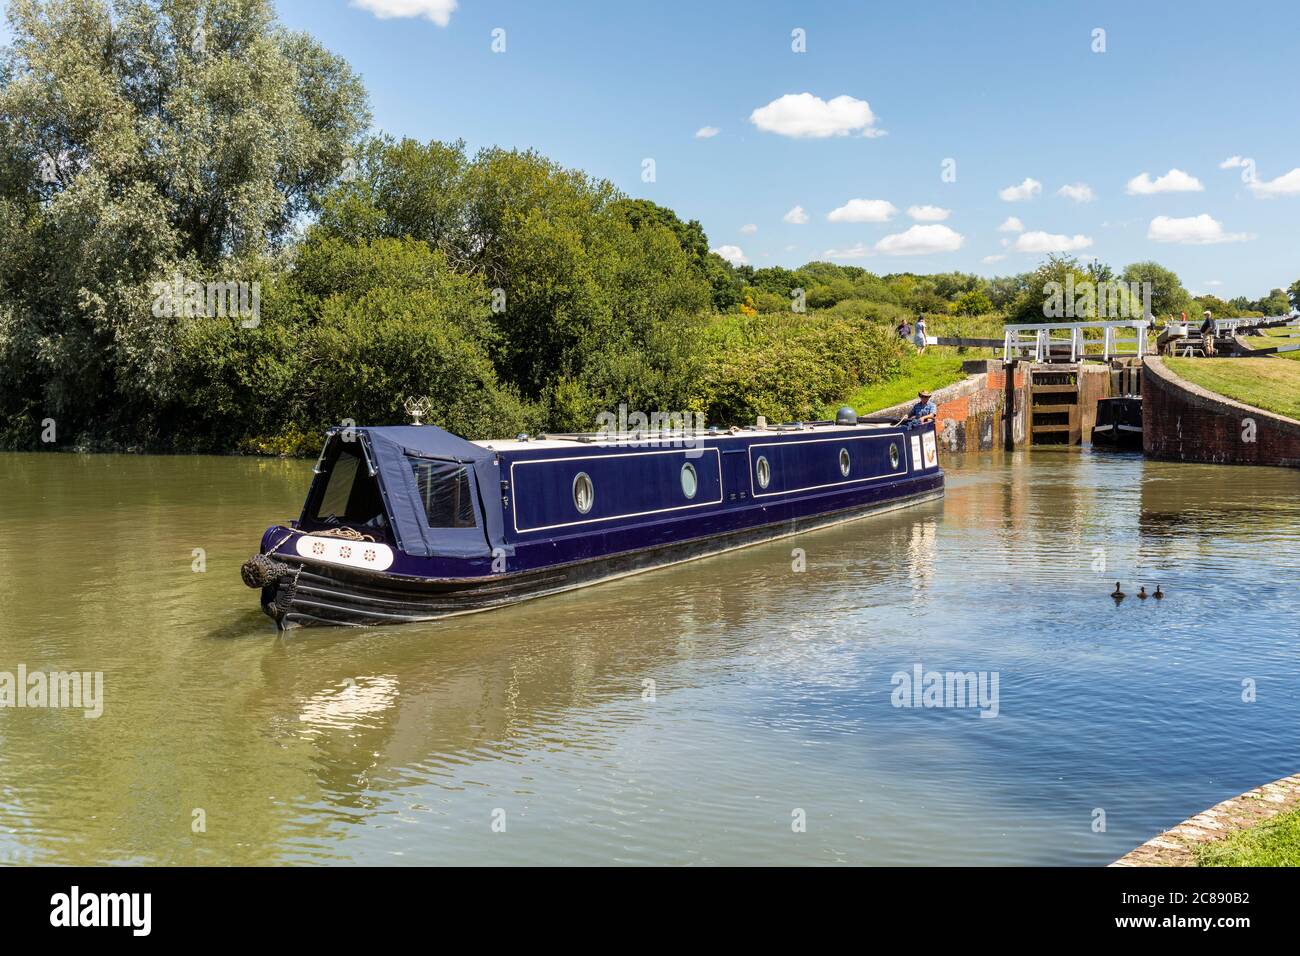 Lock gates open and Canal Boats on Caen Hill Locks, Kennet and Avon Canal, Devizes, Wiltshire, England, UK Stock Photo